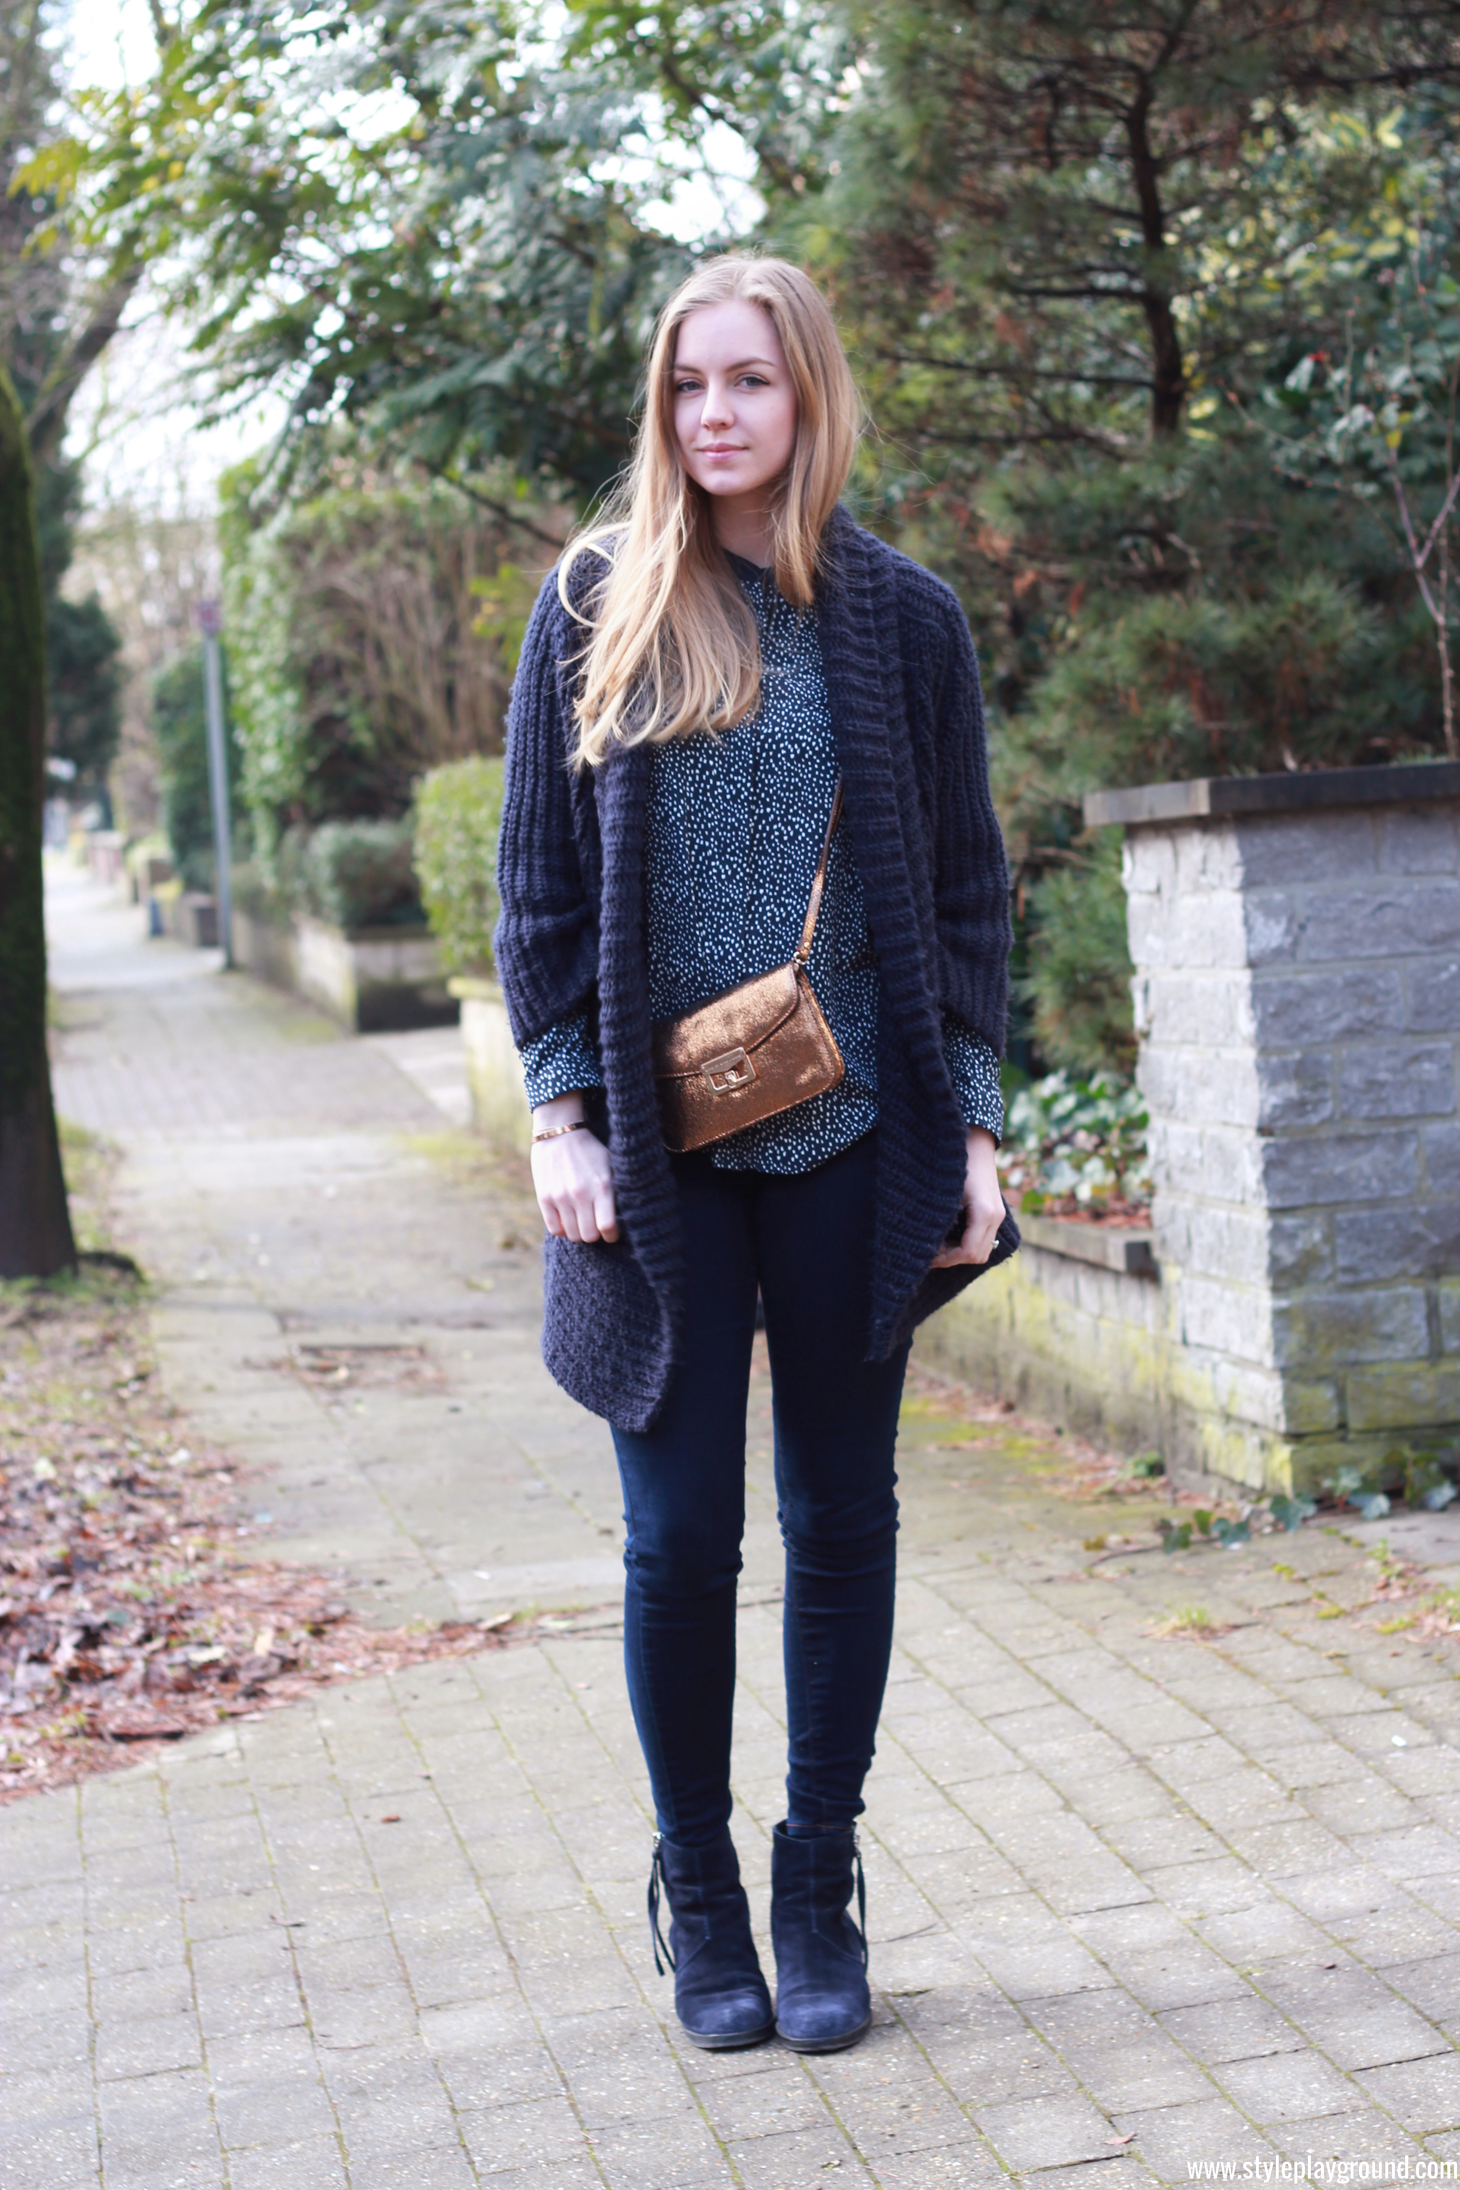 Axelle Blanpain of Style playground is wearing a Mango top, Zara knit, American Eagle jeggings, Acne boots & Marc by Marc Jacobs bag